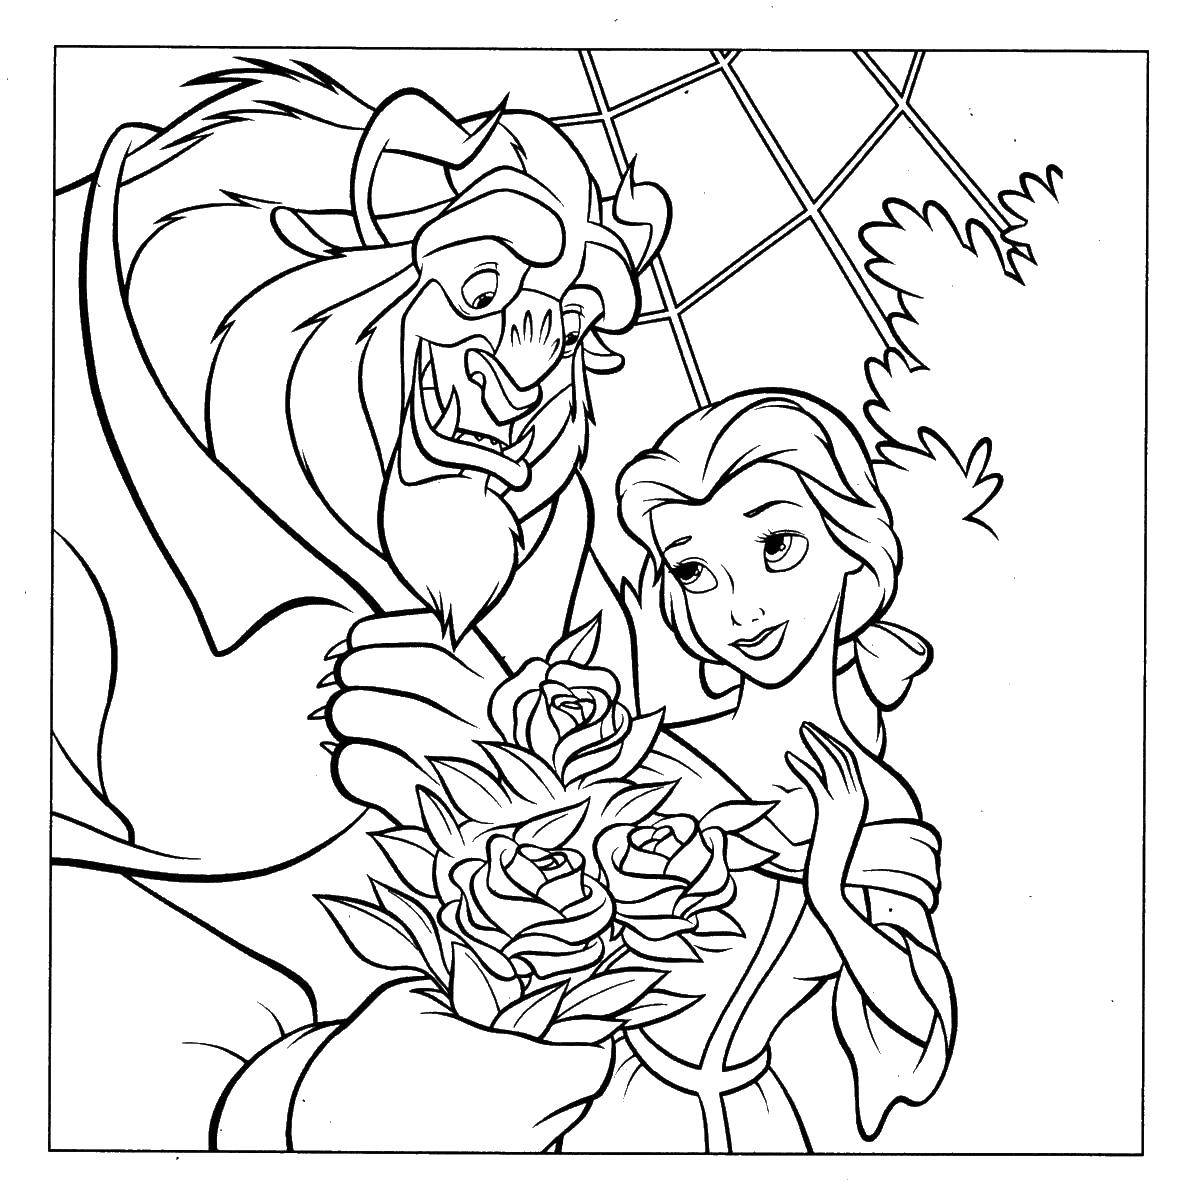 Coloring Beauty and the beast. Category Disney coloring pages. Tags:  Beauty and the Beast, Disney.